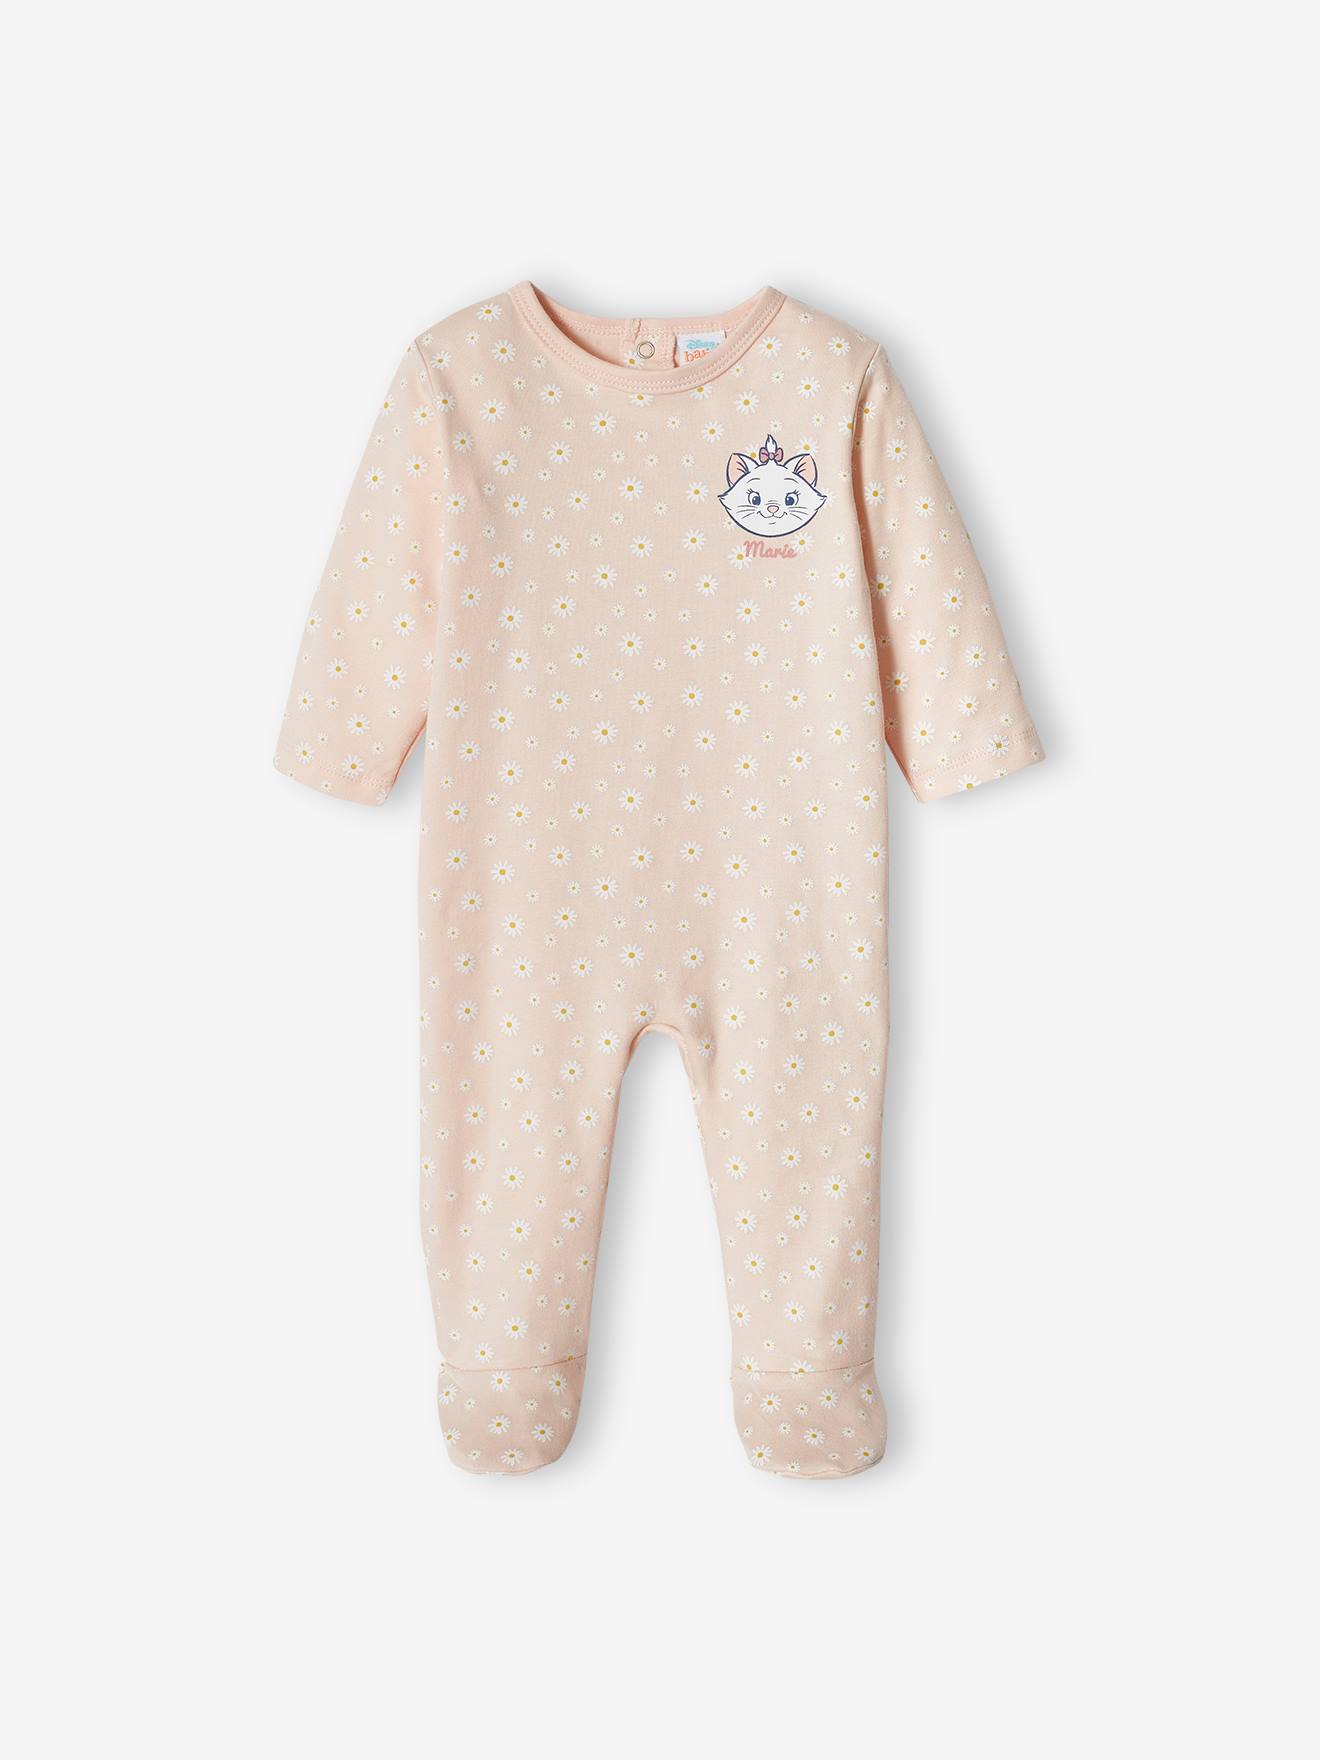 Sleepsuit for Babies, Marie of The Aristocats by Disney(r) pale pink